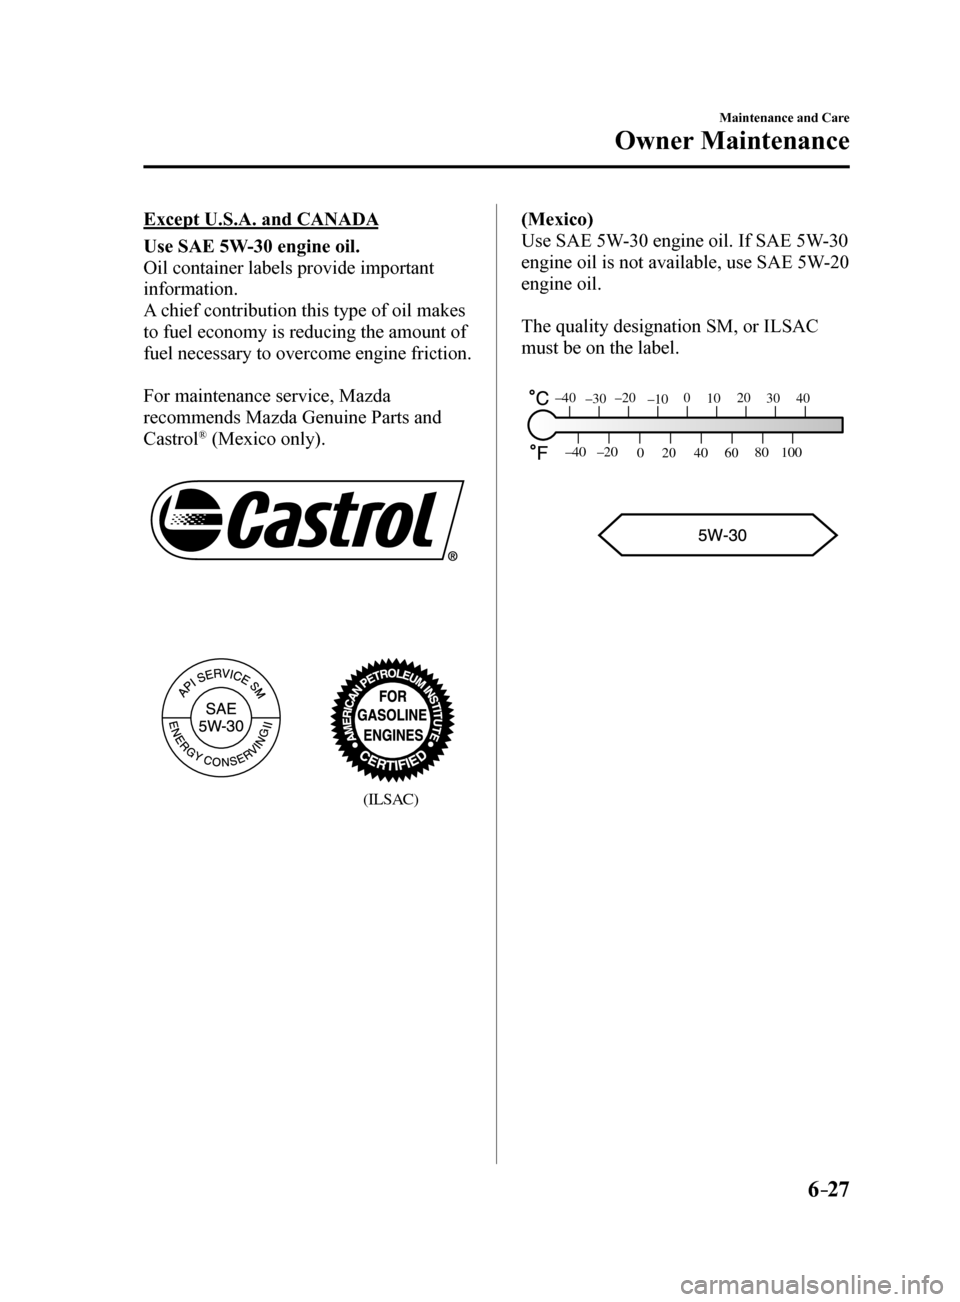 MAZDA MODEL 6 2017   (in English) Owners Guide 6–27
Maintenance and Care
Owner Maintenance
Except U.S.A. and CANADA
Use SAE 5W-30 engine oil.
Oil container labels provide important 
information.
A chief contribution this type of oil makes 
to fu